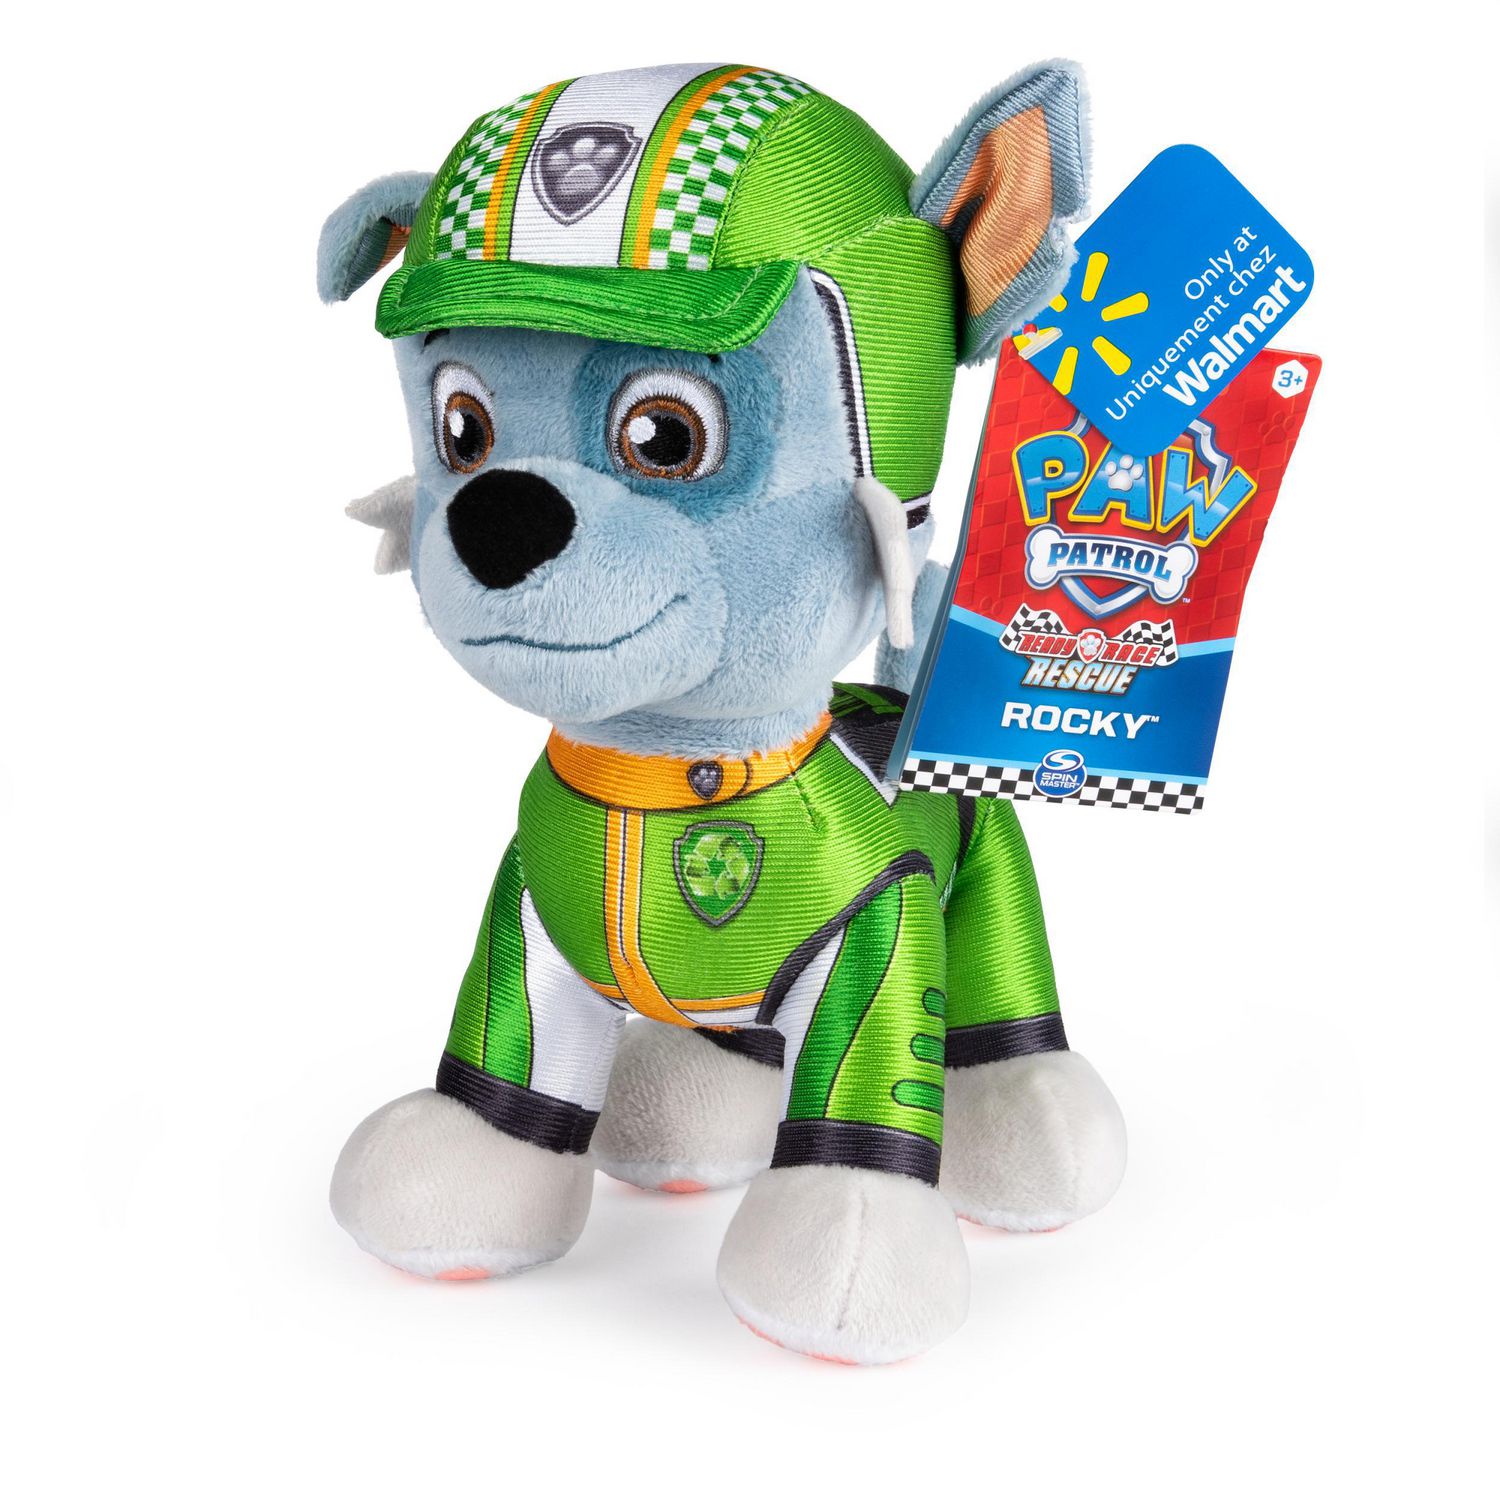 PAW Patrol, 8-Inch Ready, Race, Rescue Rocky Plush, Exclusive, for Kids Aged 3 and Up | Walmart Canada